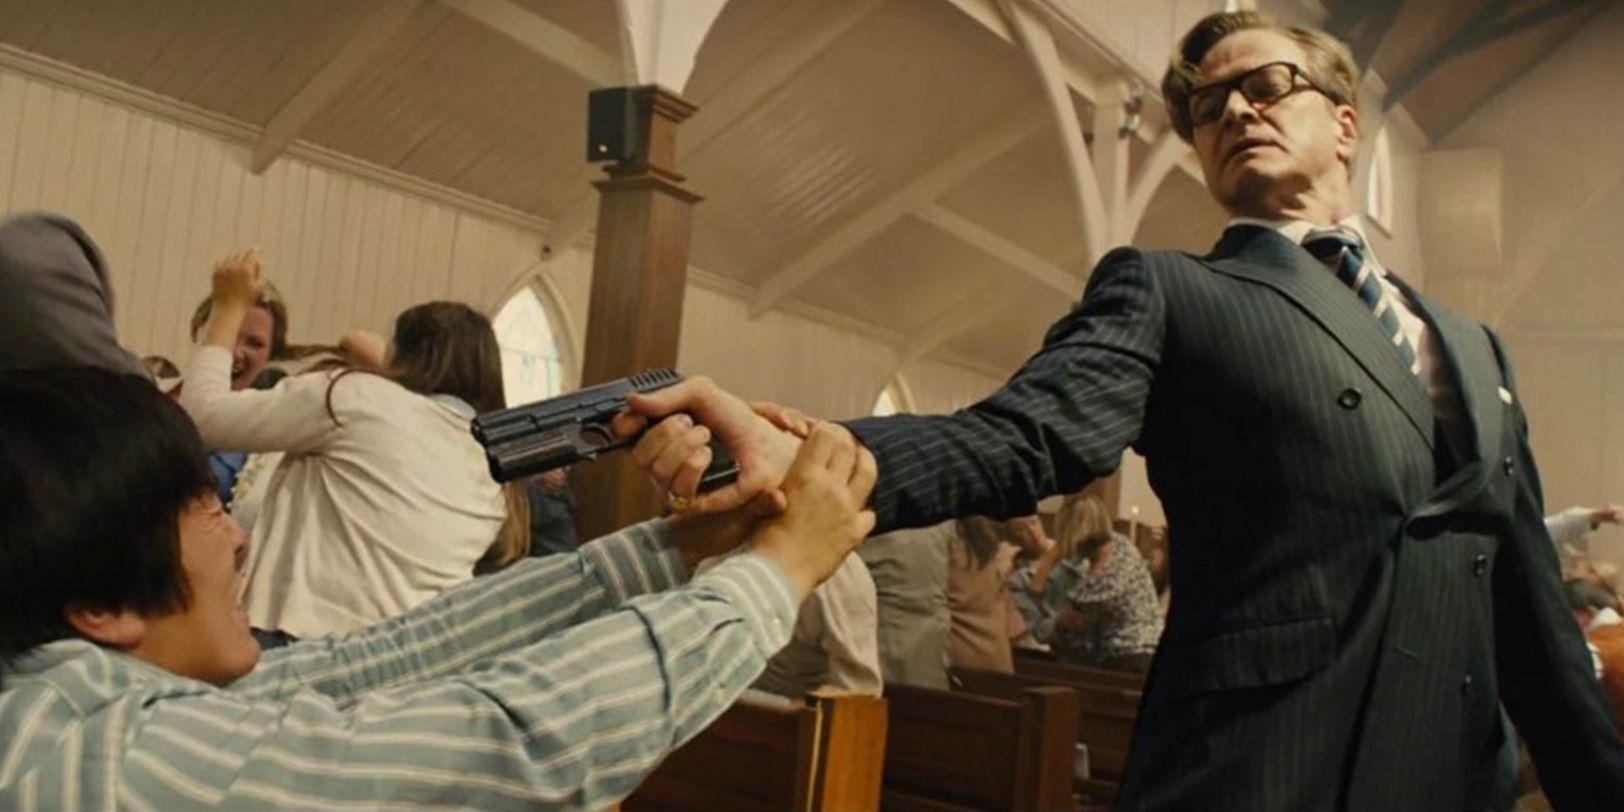 The church fight in Kingsman The Secret Service